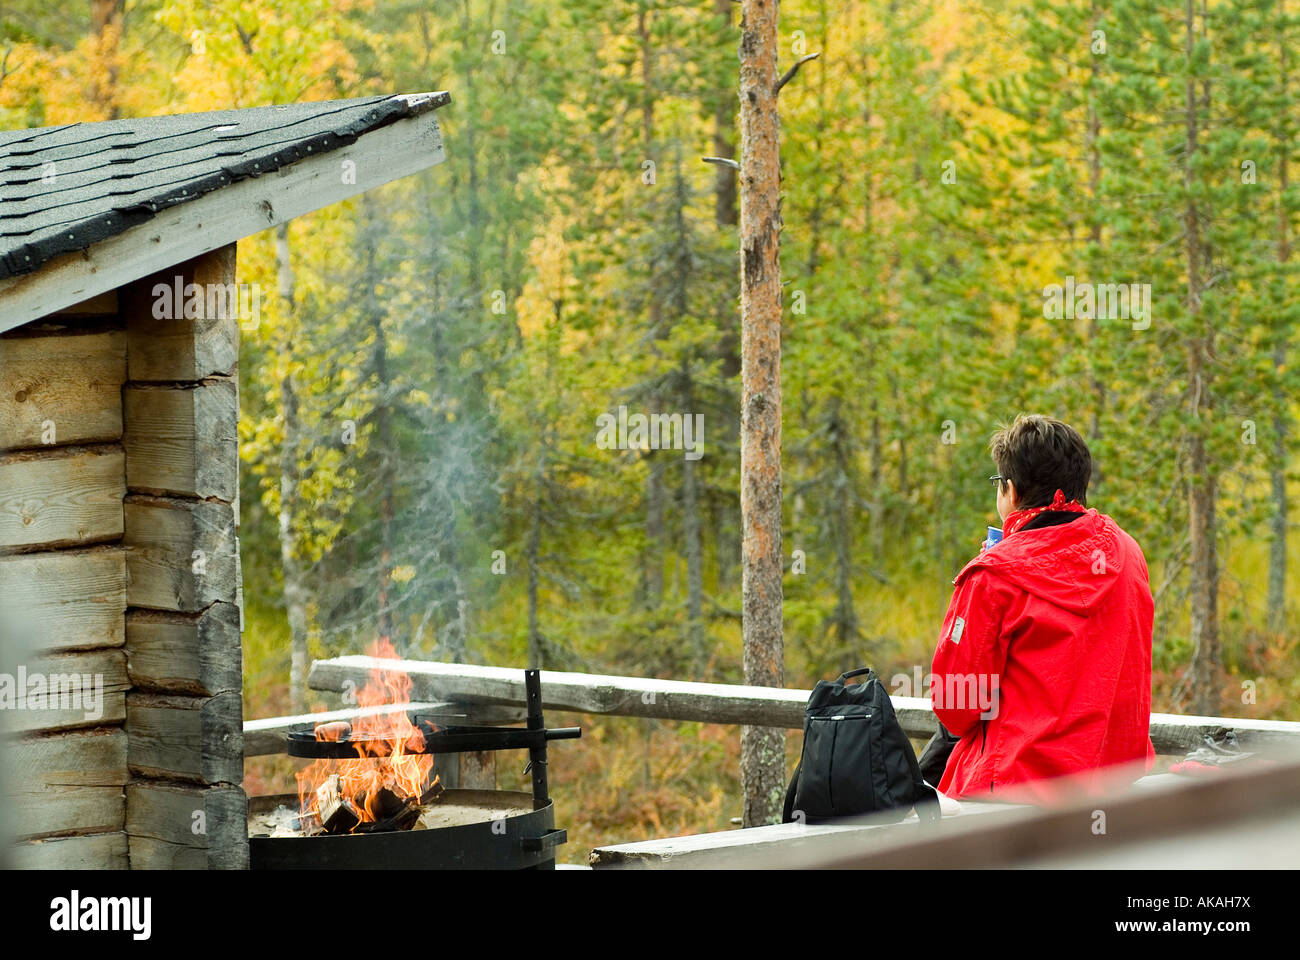 woman at a block cabin refugee with fire place for a pause at a trecking route Stock Photo